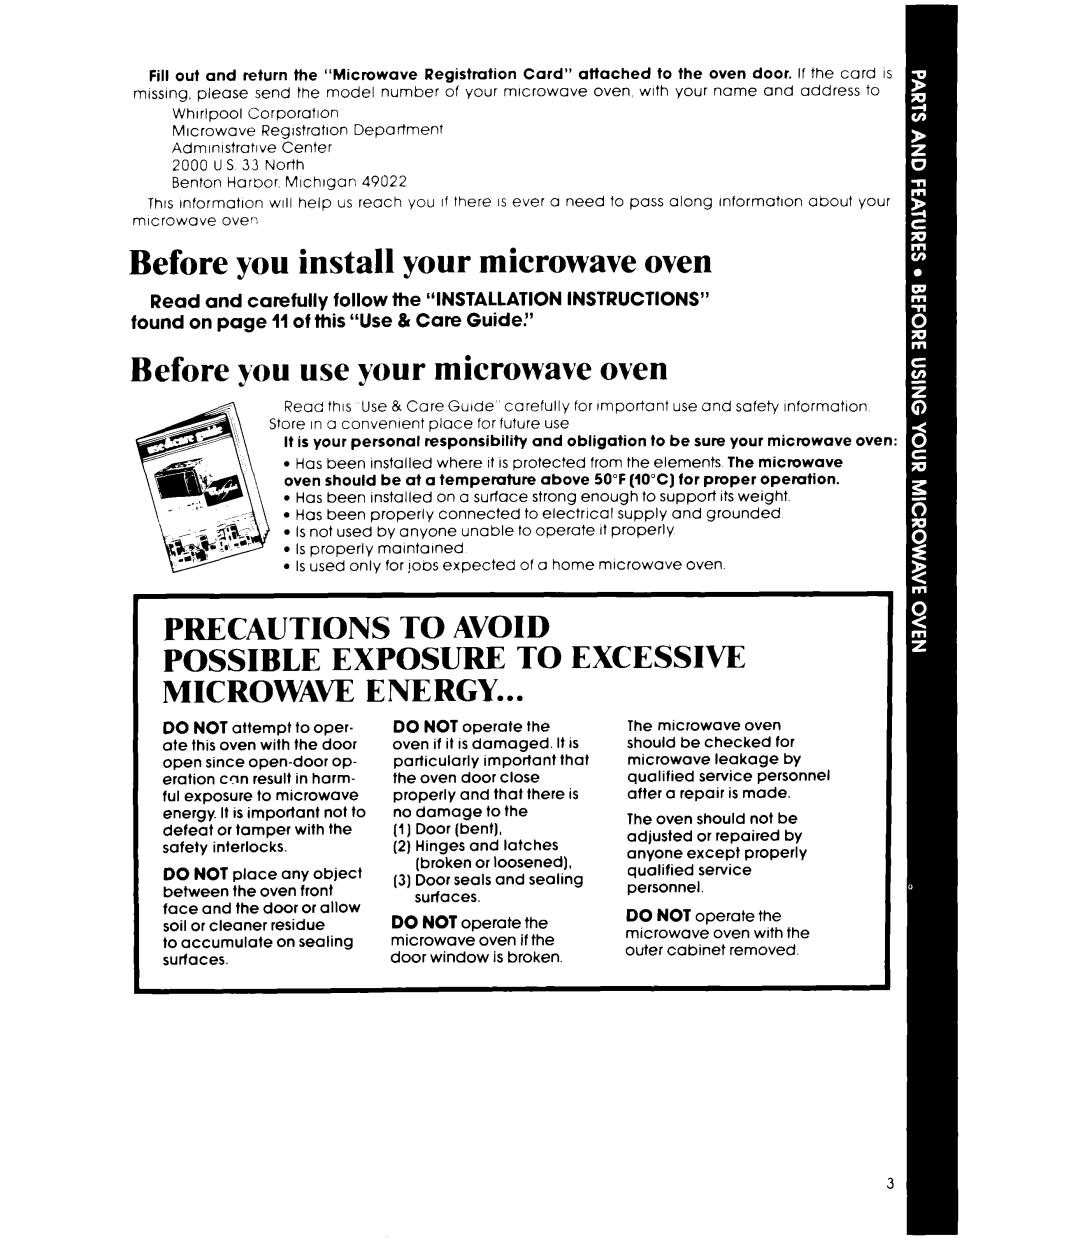 Whirlpool MW8400XR manual Before you install your microwave oven, Before you use your microwave oven, Precautions To Avoid 